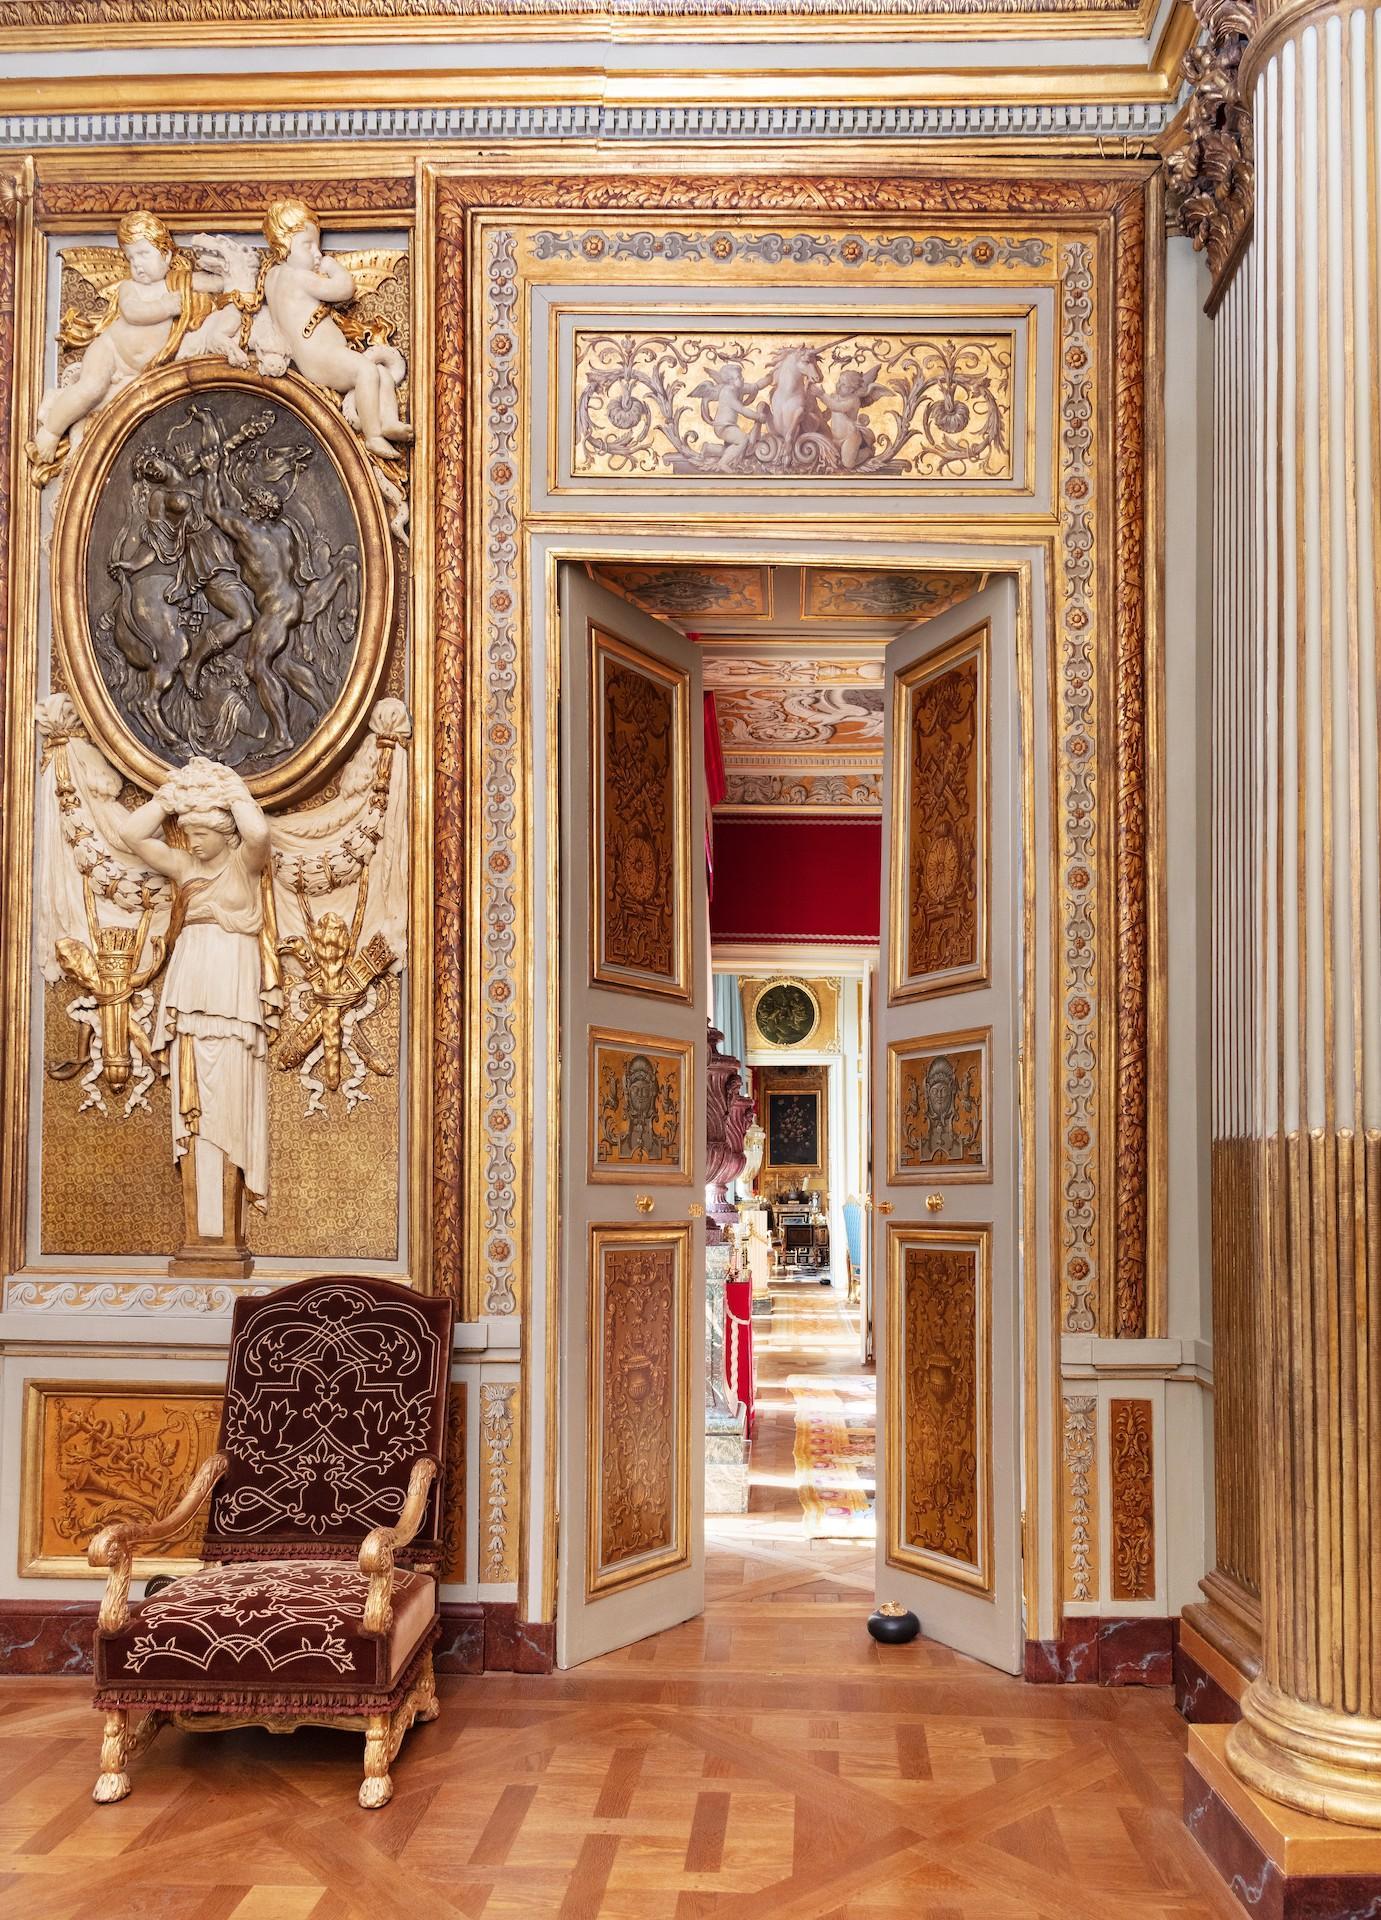 Sotheby’s to Auction Treasures Housed in One of Paris’ Most Historic Buildings